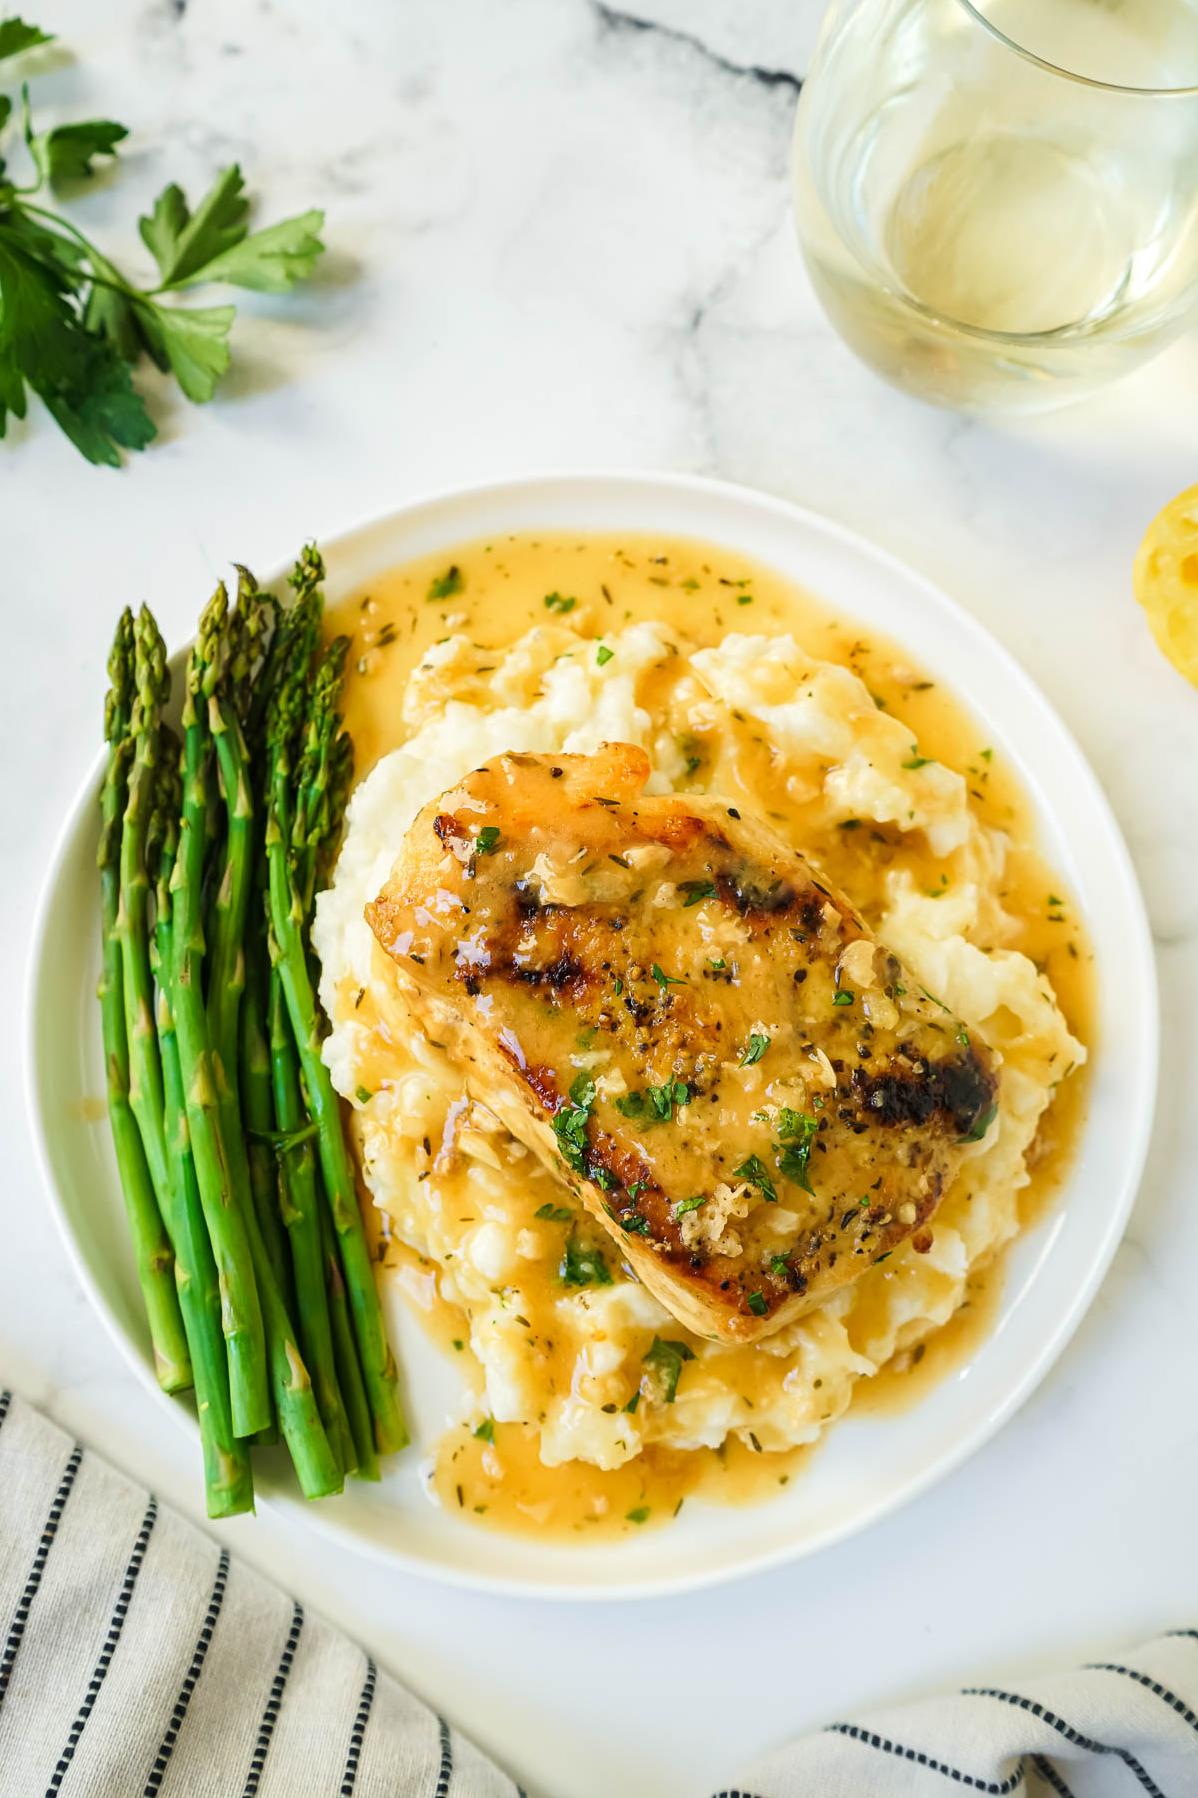  The perfect balance of tender chicken and tangy white wine.